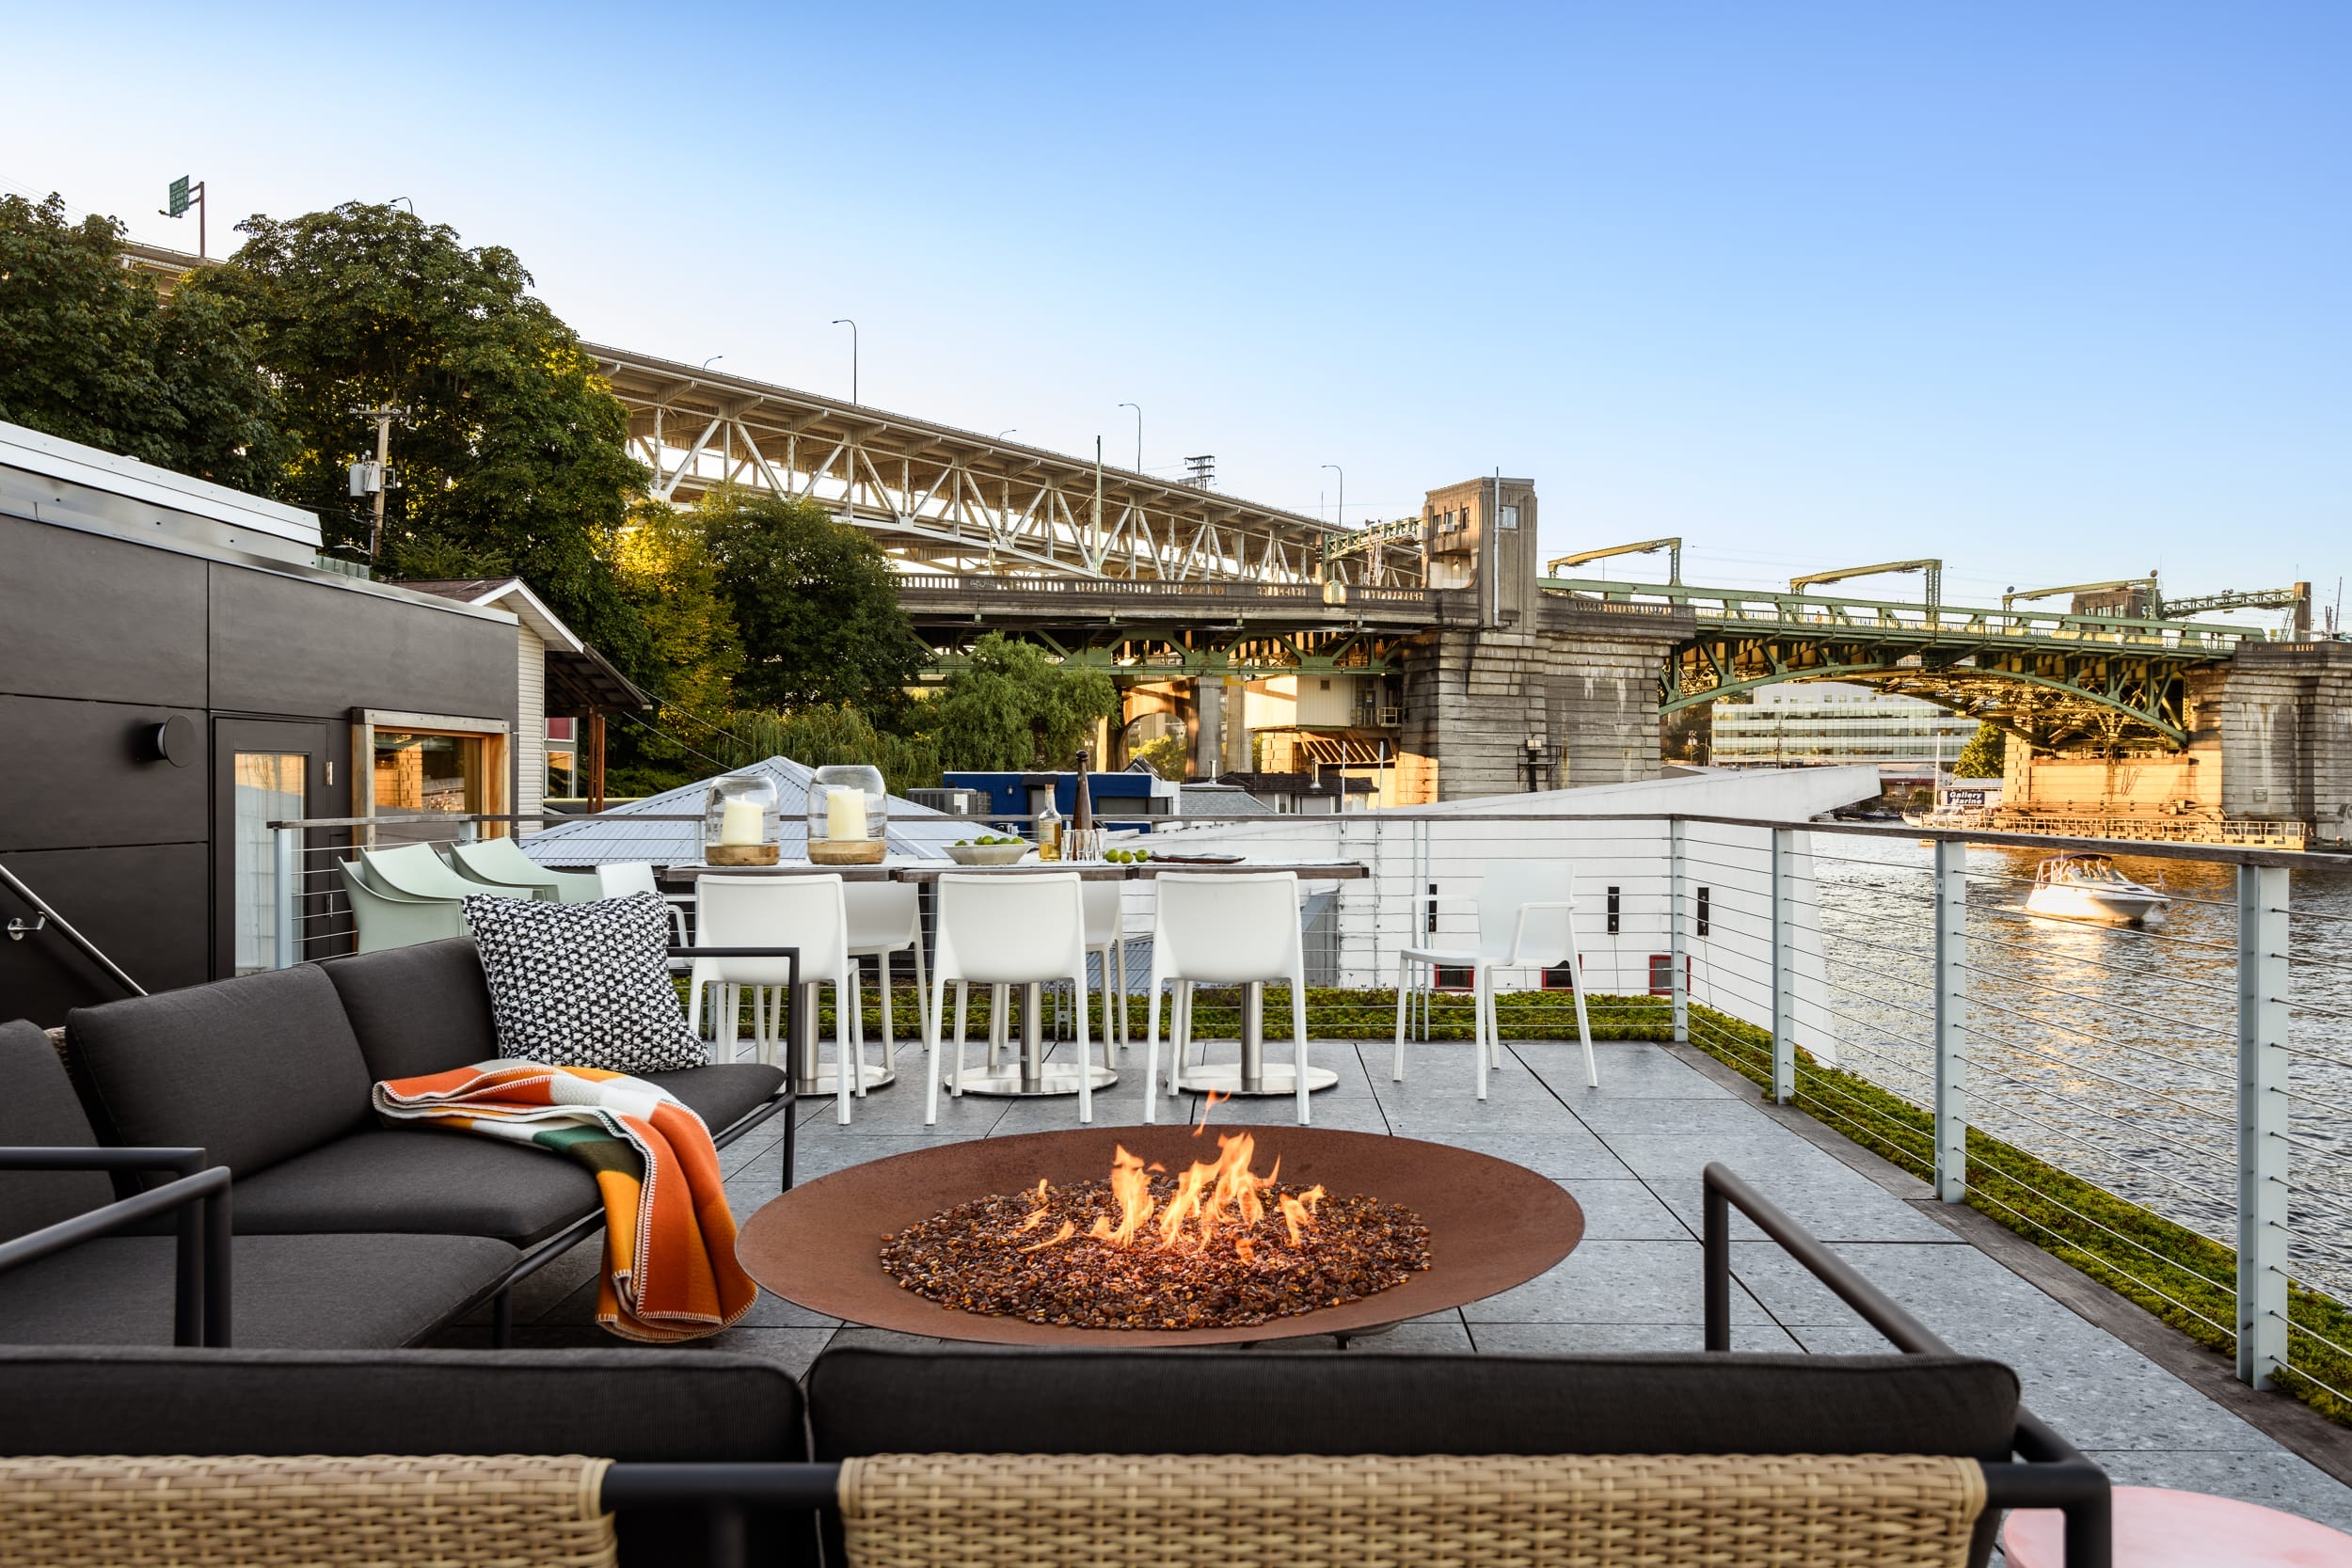 A fire pit on a deck overlooking a river.